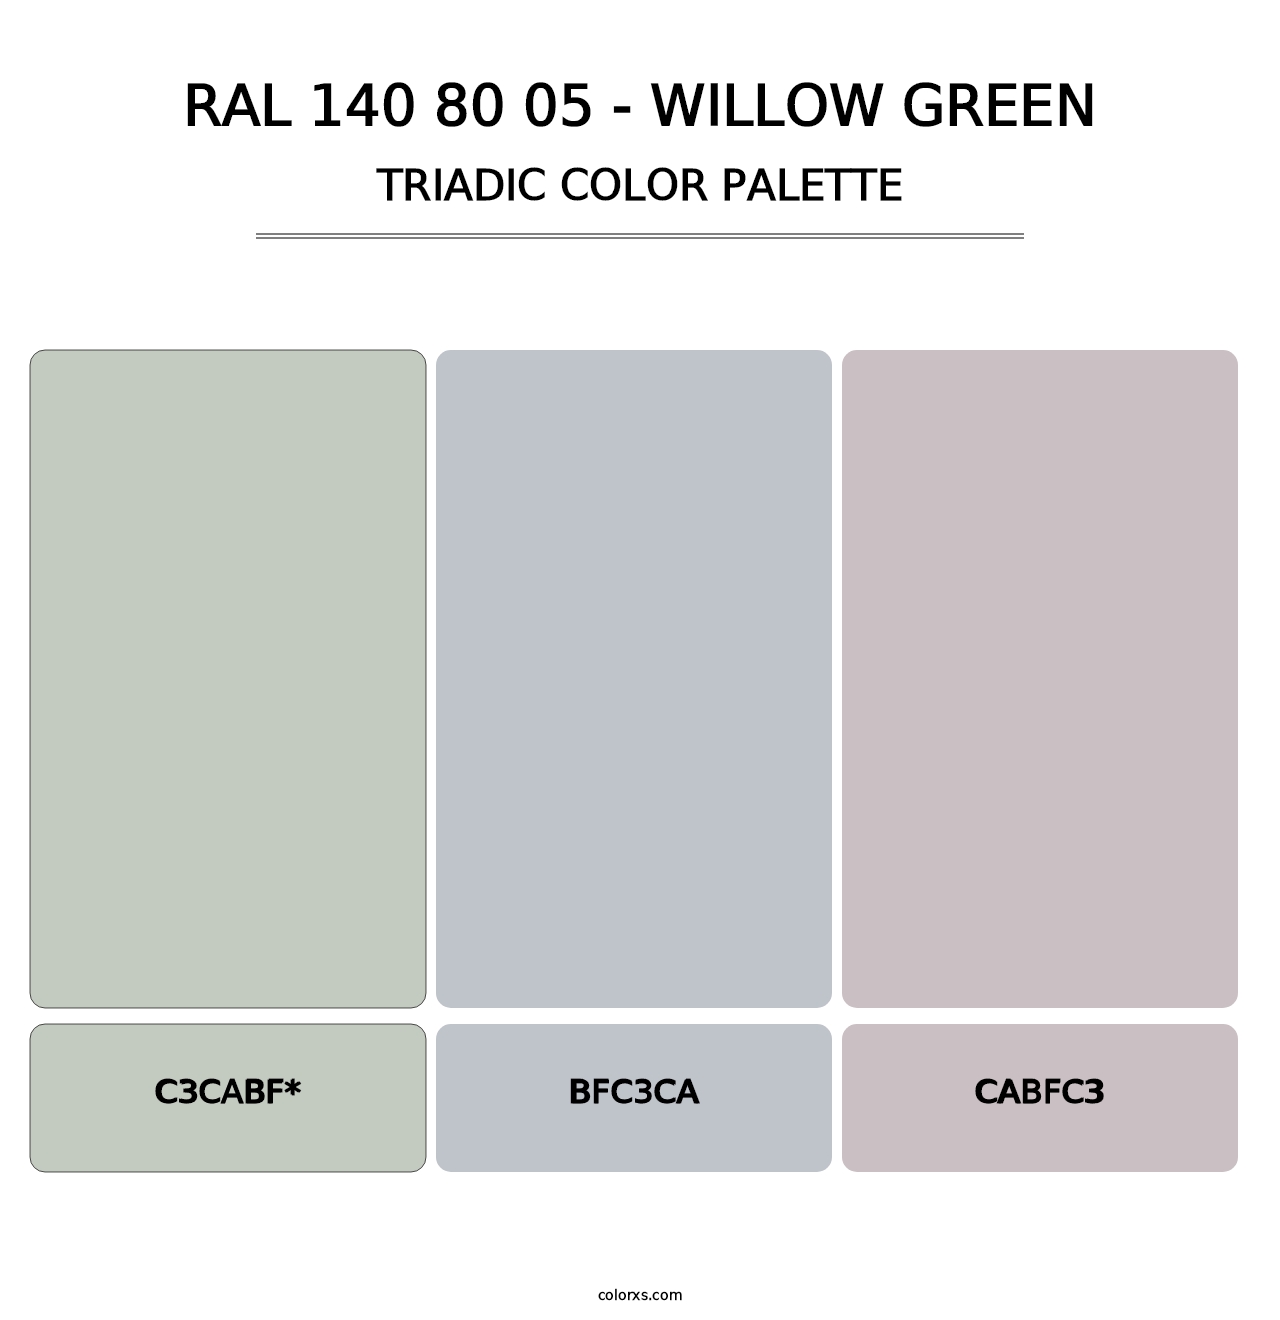 RAL 140 80 05 - Willow Green - Triadic Color Palette